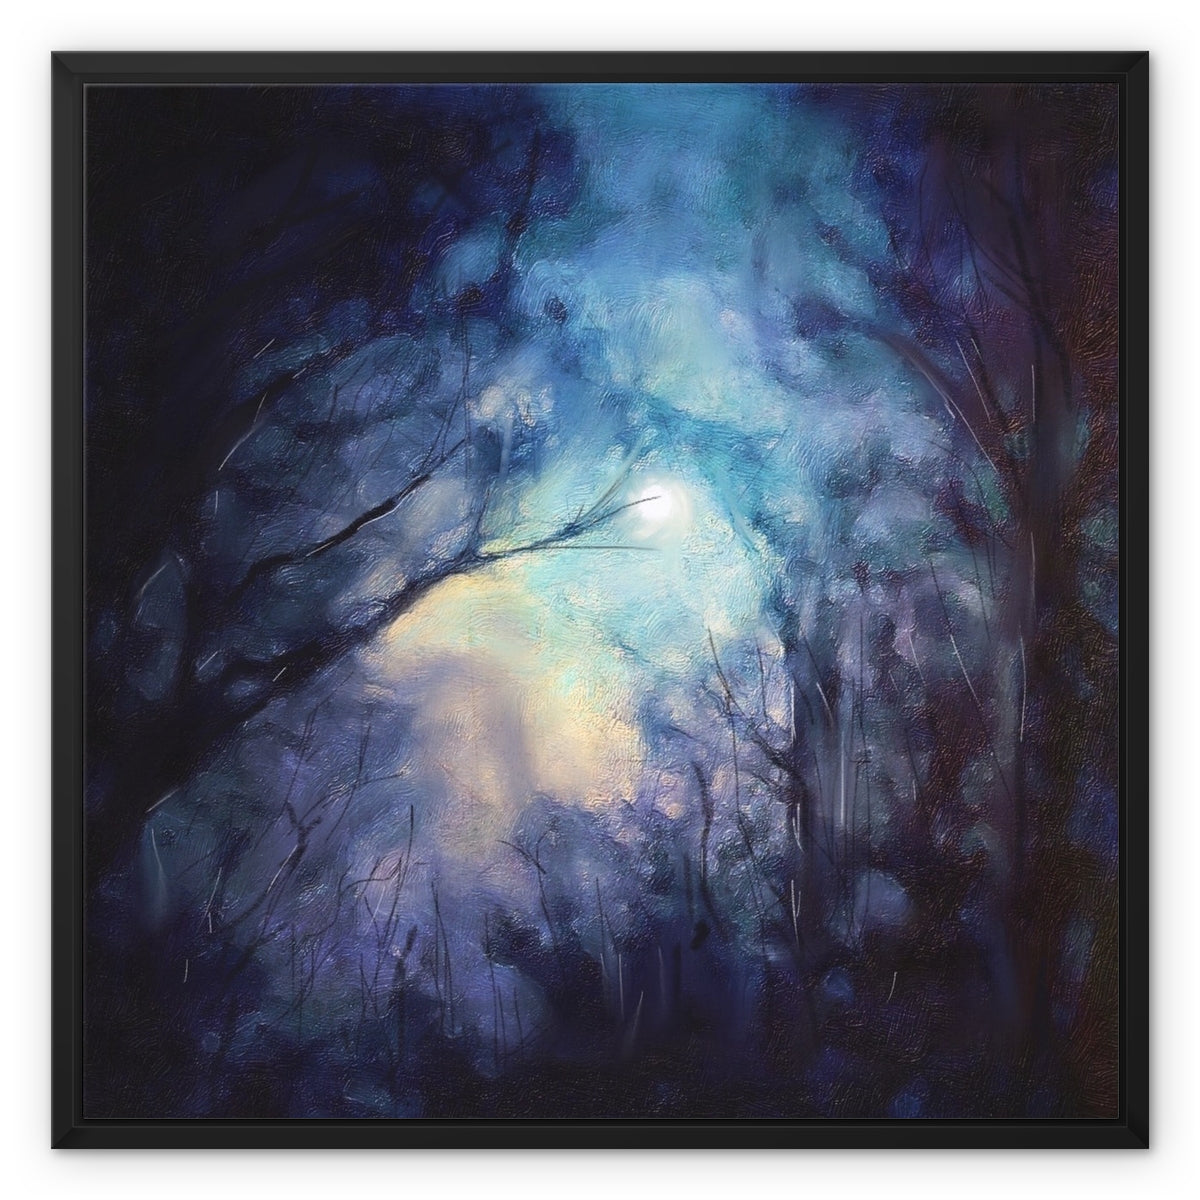 A Moonlit Highland Wood Painting | Framed Canvas From Scotland-Floating Framed Canvas Prints-Scottish Highlands & Lowlands Art Gallery-24"x24"-Paintings, Prints, Homeware, Art Gifts From Scotland By Scottish Artist Kevin Hunter